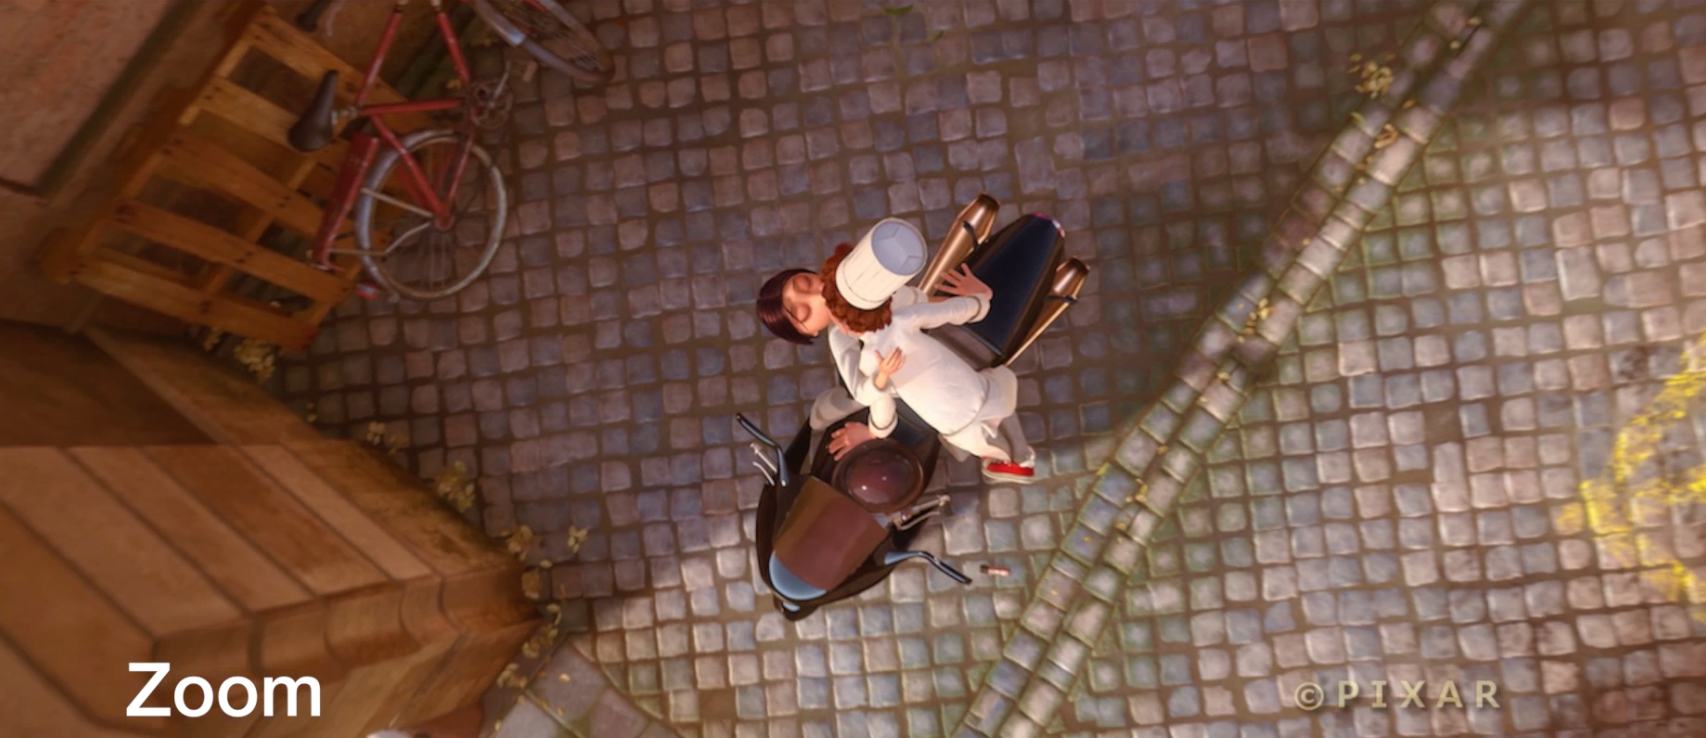 Zoom shot from Ratatouille.